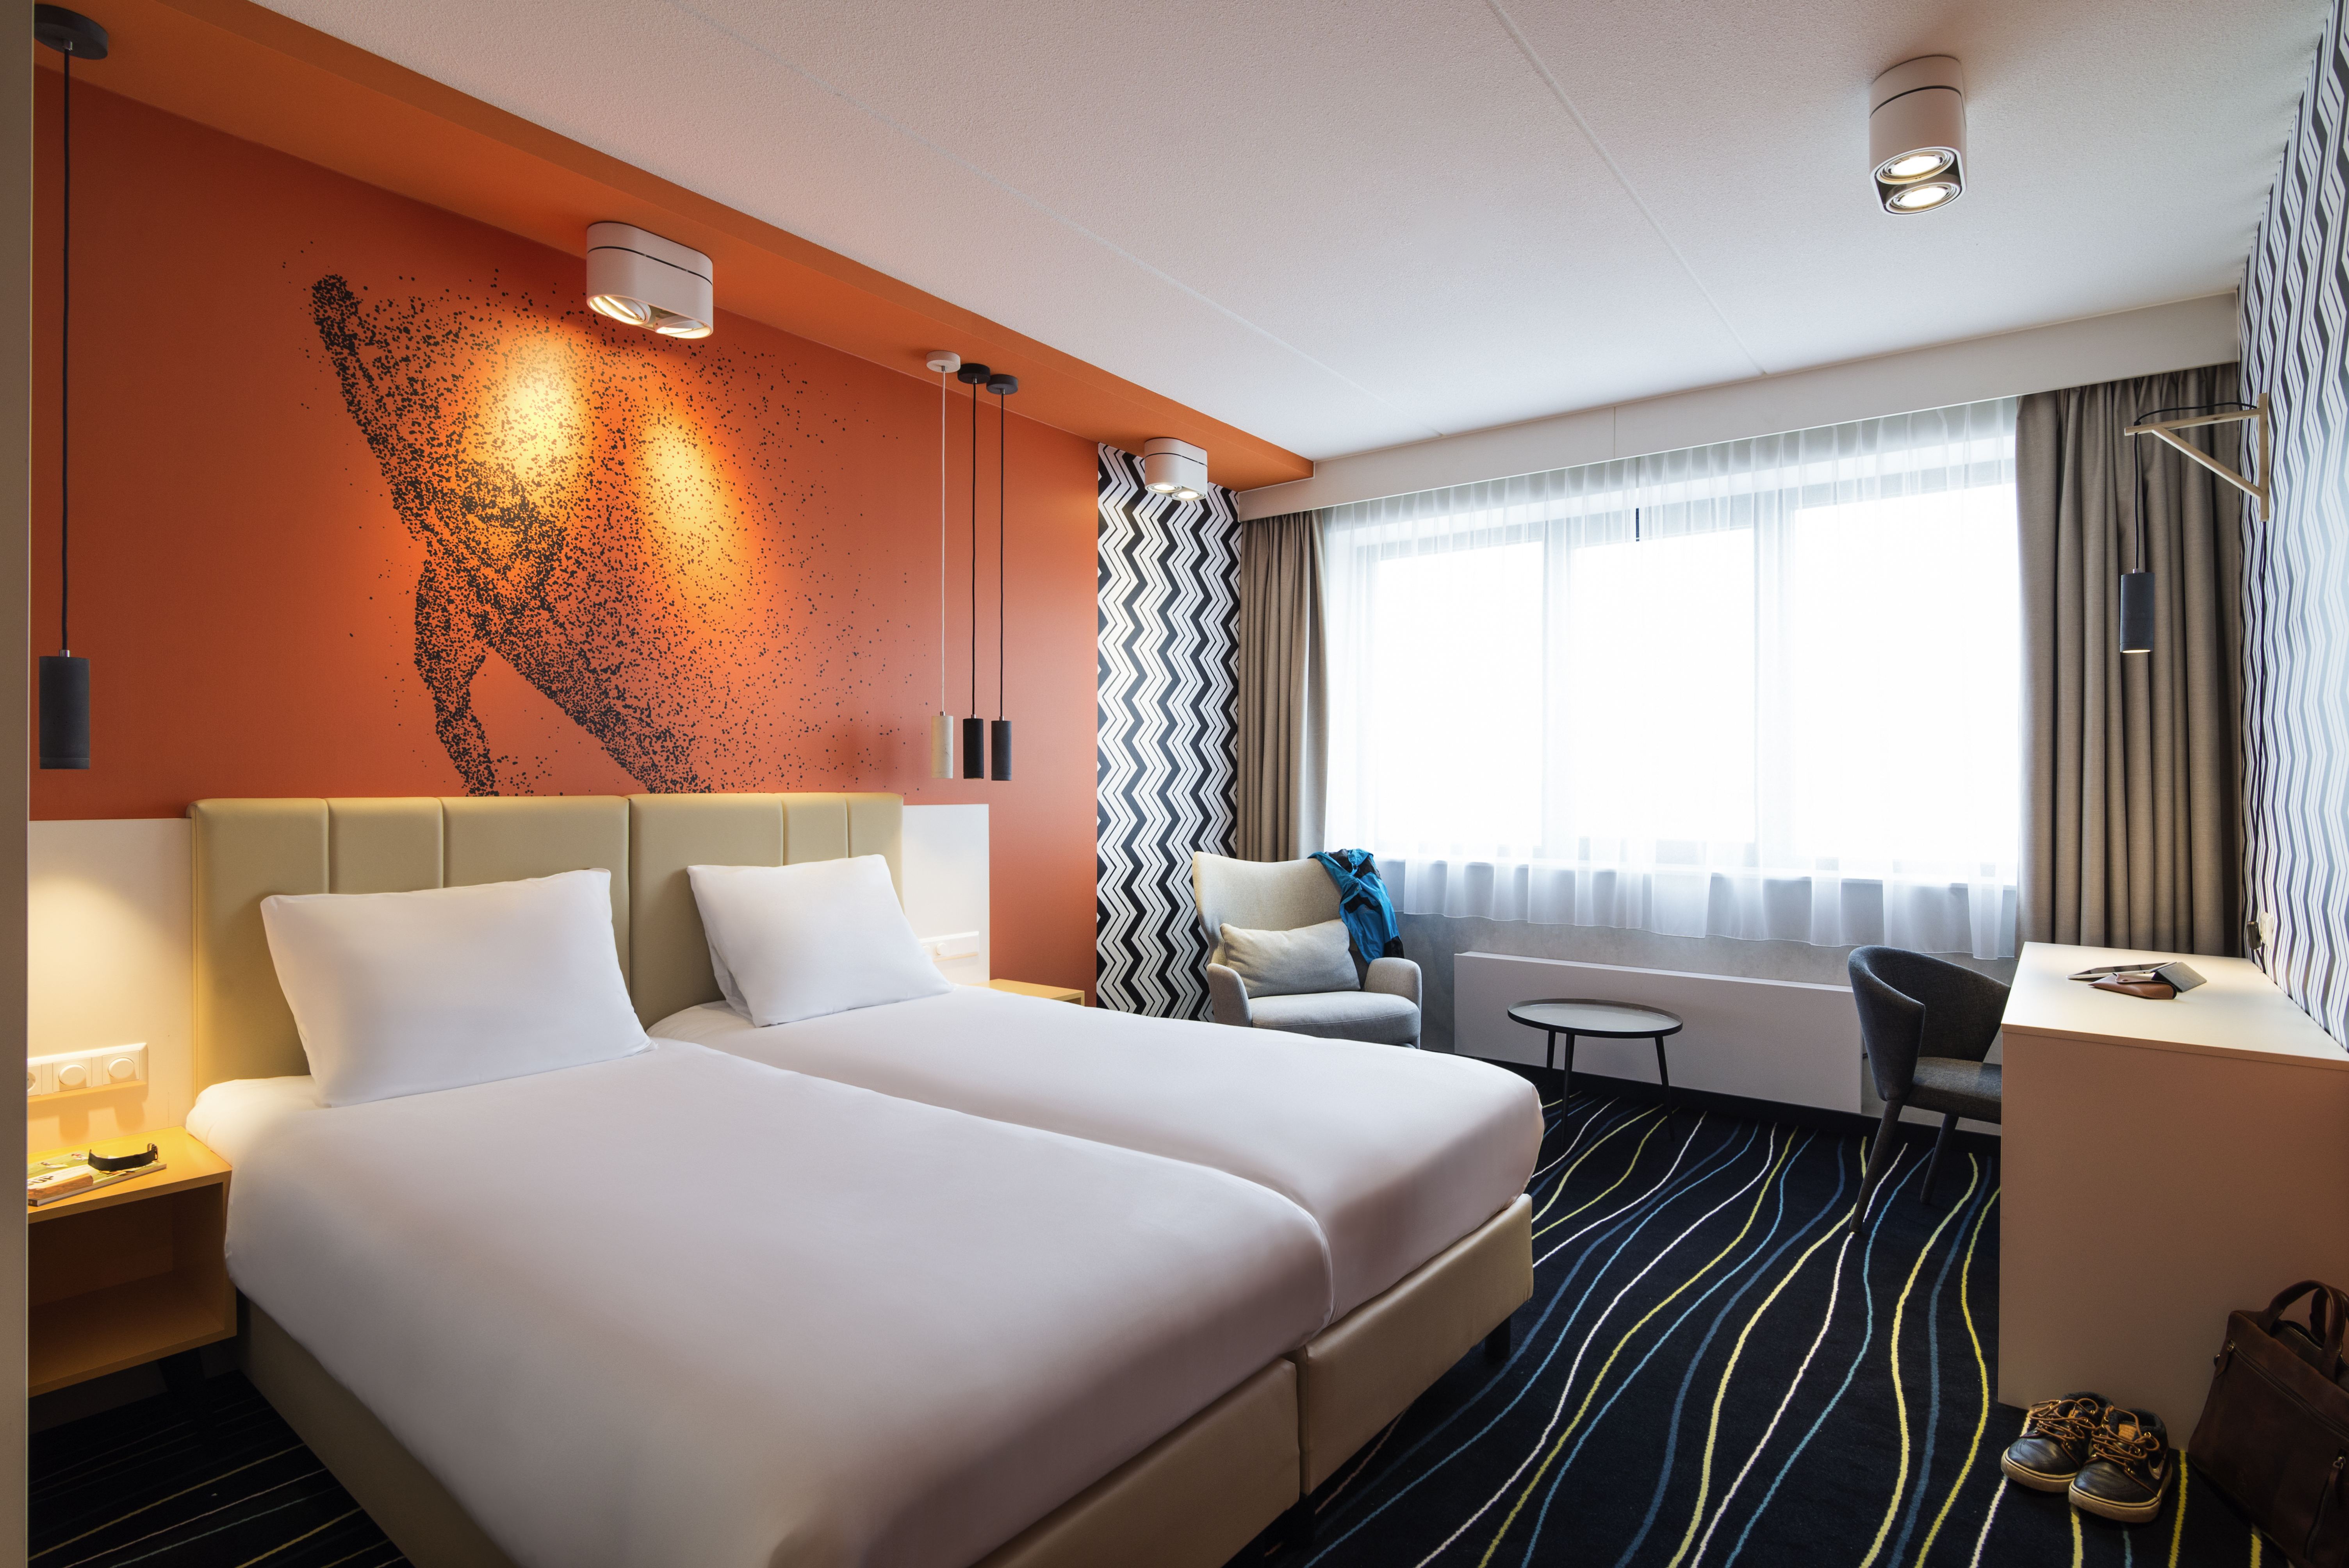 Ibis Styles Haarlem City <br/>84.00 ew <br/> <a href='http://vakantieoplossing.nl/outpage/?id=a7d399df69ec01eddc9b2a8ef36cbc64' target='_blank'>View Details</a>